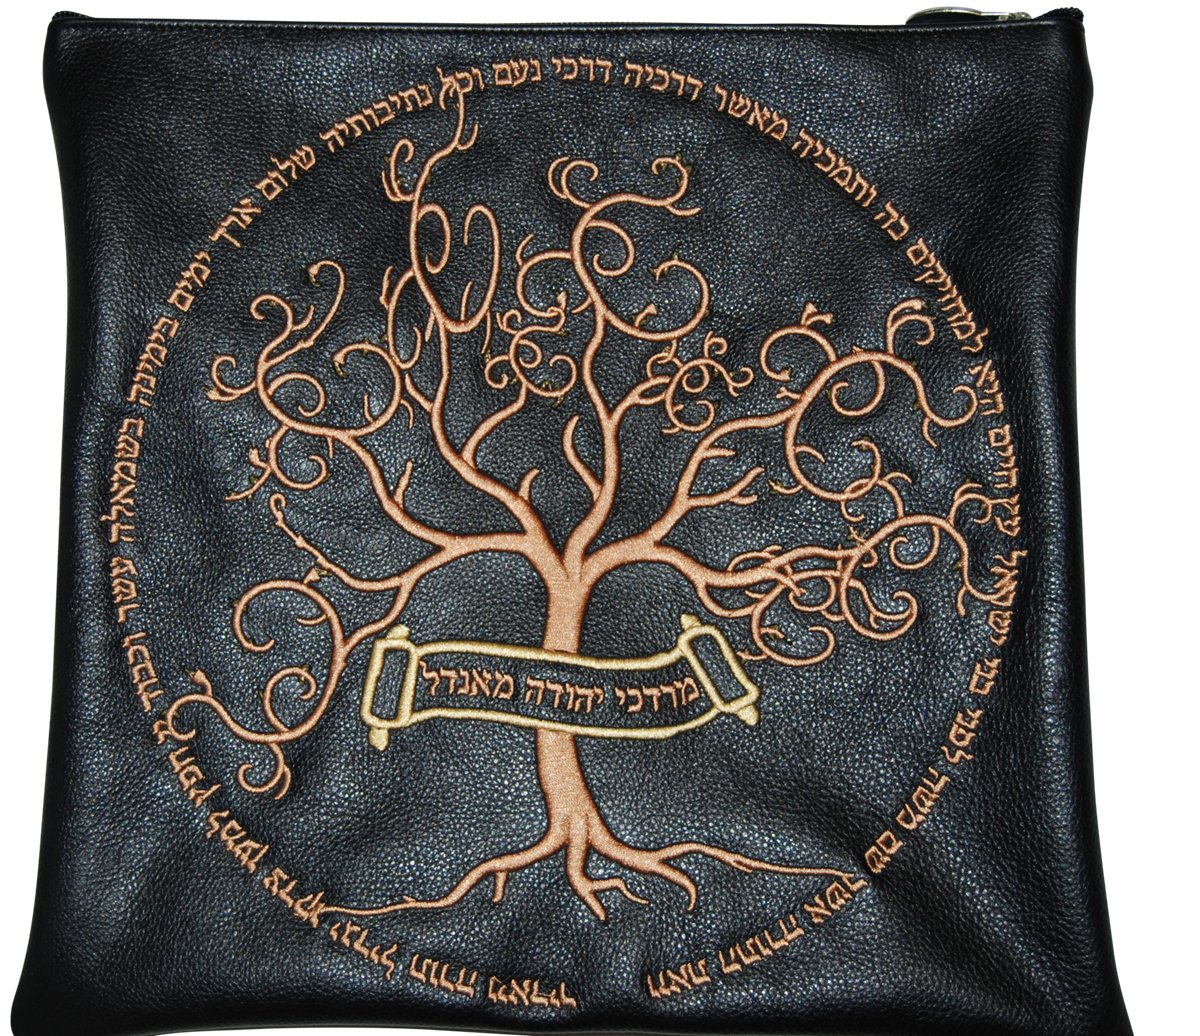 Artistic tree art design on black leather - Simcha Couture